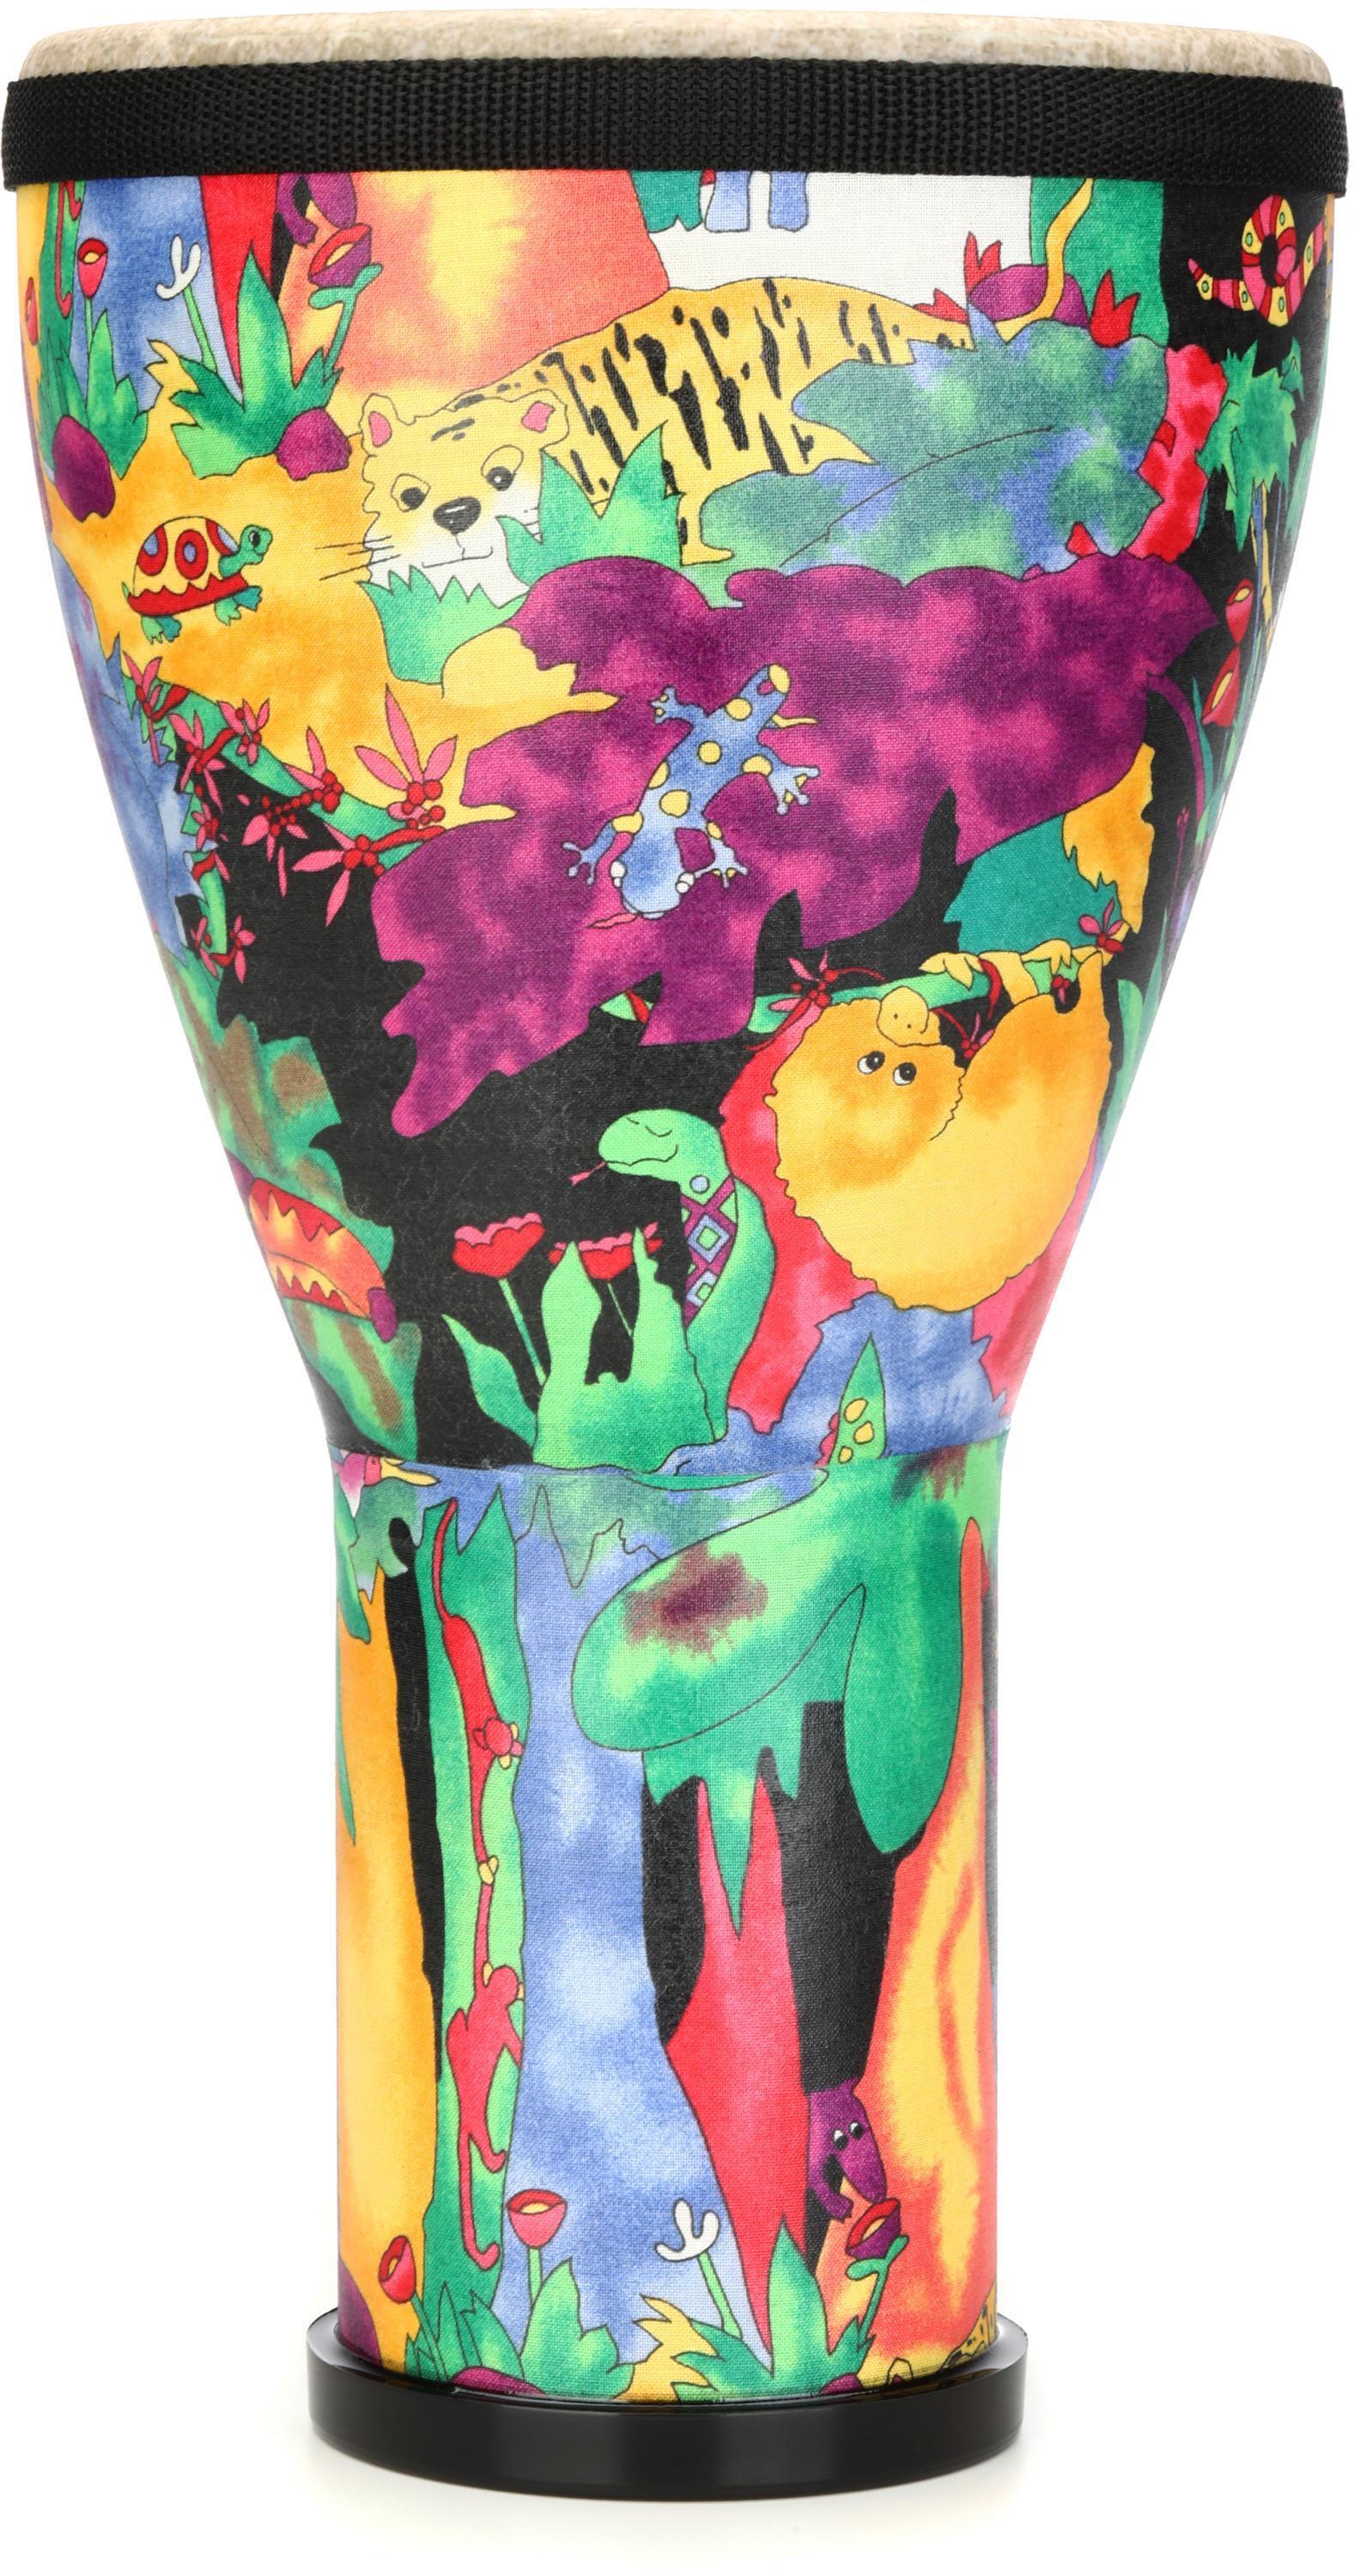 Buy Remo Kids Percussion Djembe Drum - Fabric Rain Forest, 8